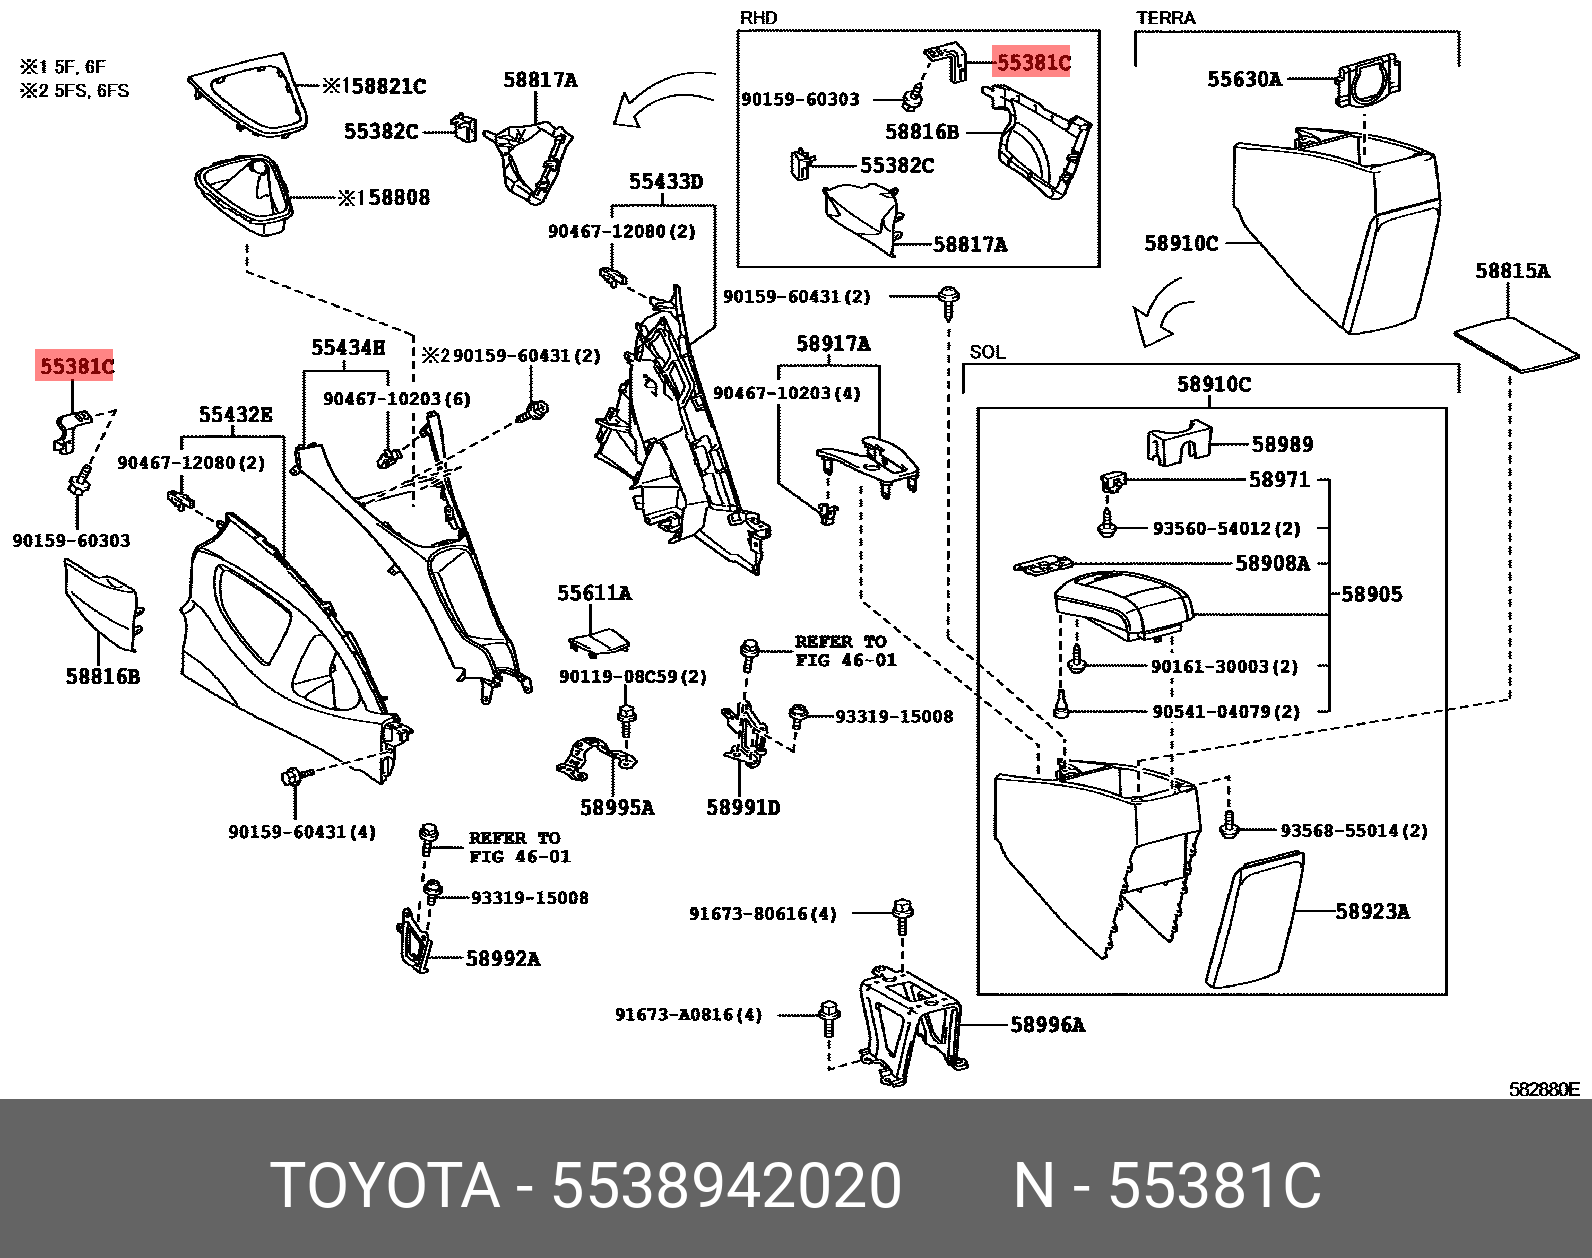 PRIUS (PLUG-IN) LEASE 200912 - 201010, BRACKET, CONSOLE MOUNTING, LH